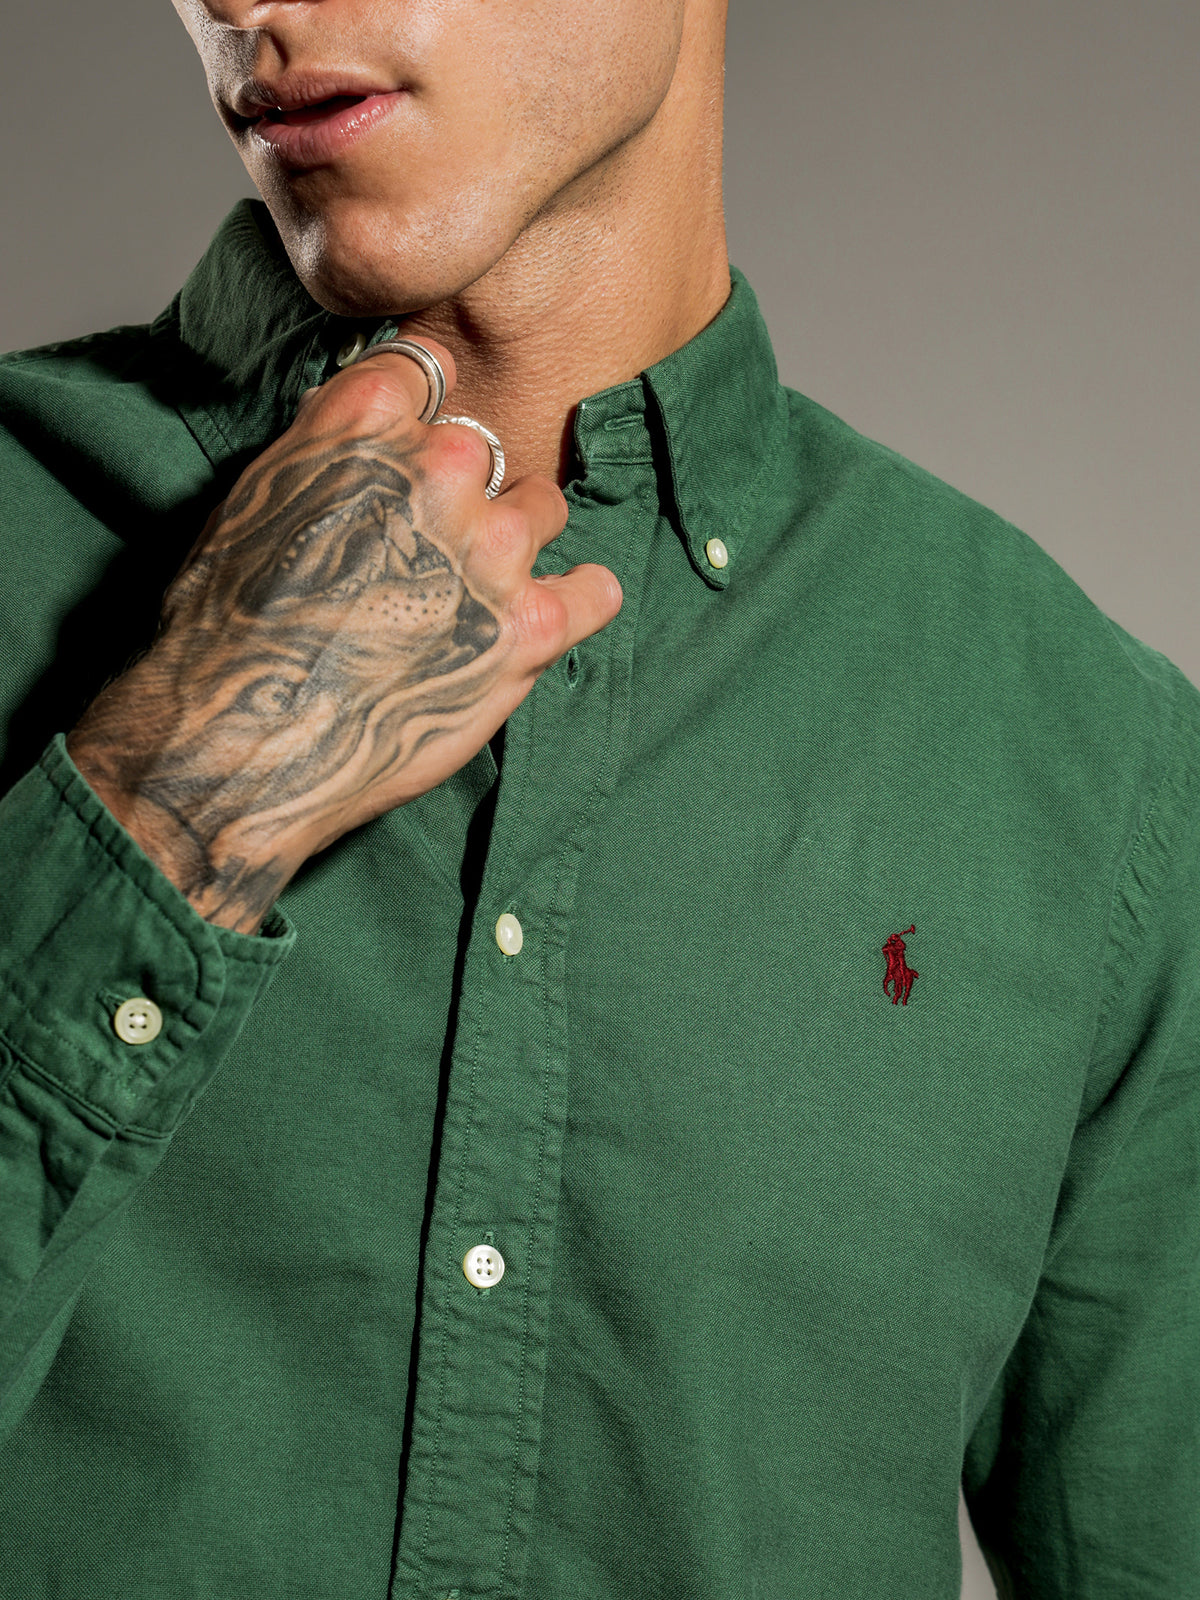 Slim Fit Garment Dyed Oxford Shirt in Green